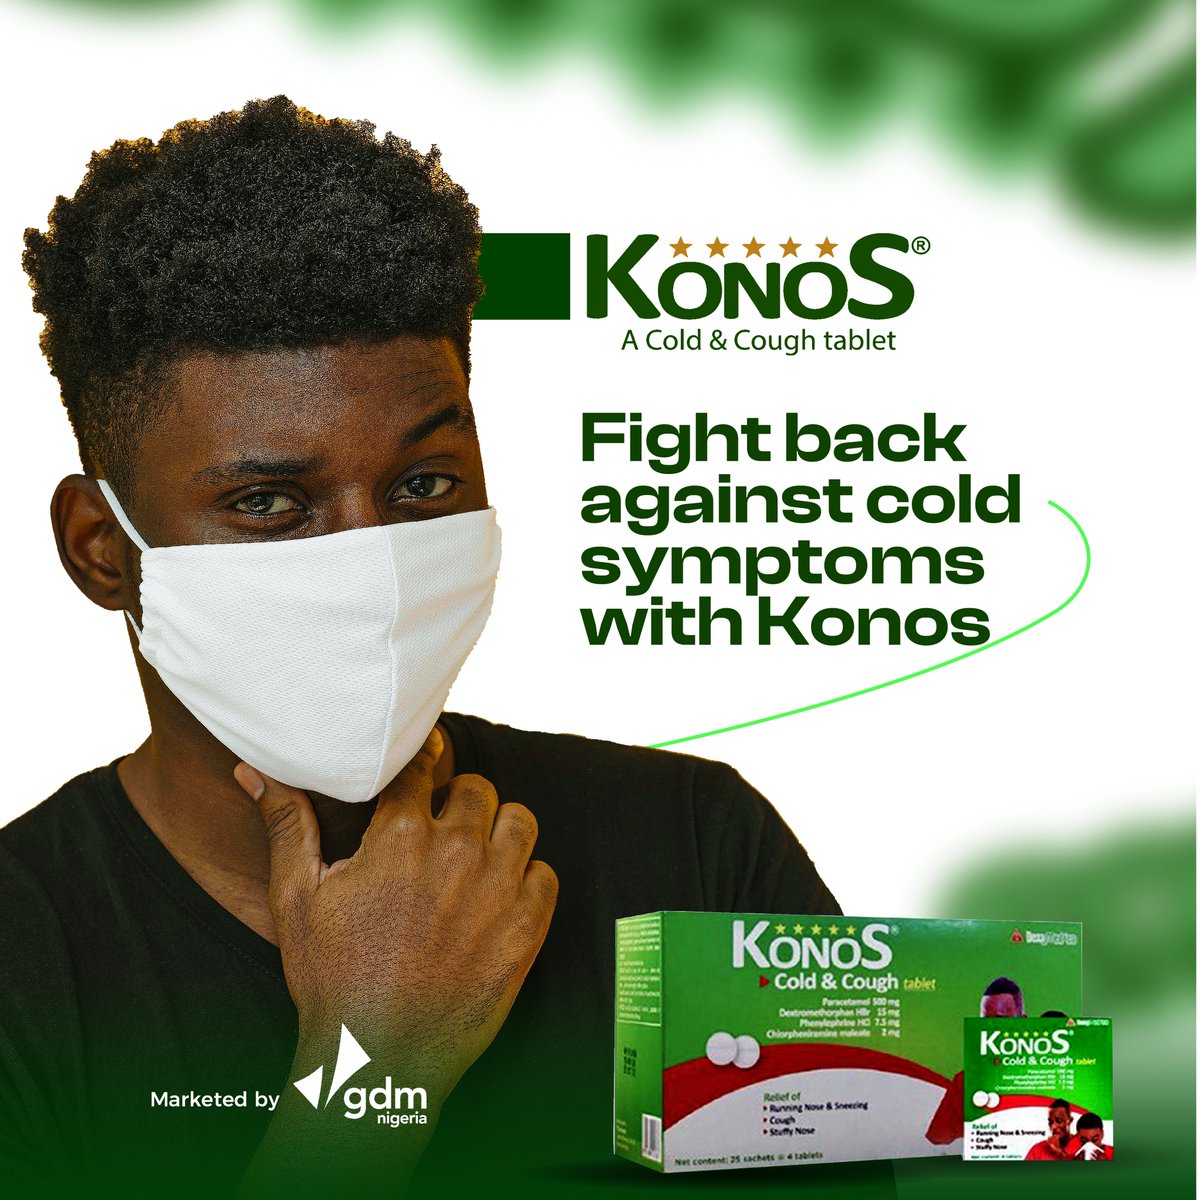 Wave goodbye to colds and coughs with Konos! 🌬️🛡️ Keep your days clear and your nights peaceful. With Konos on your side, nothing can hold you back!

#BreatheEasy #coldremedy #Konos #coldrelief